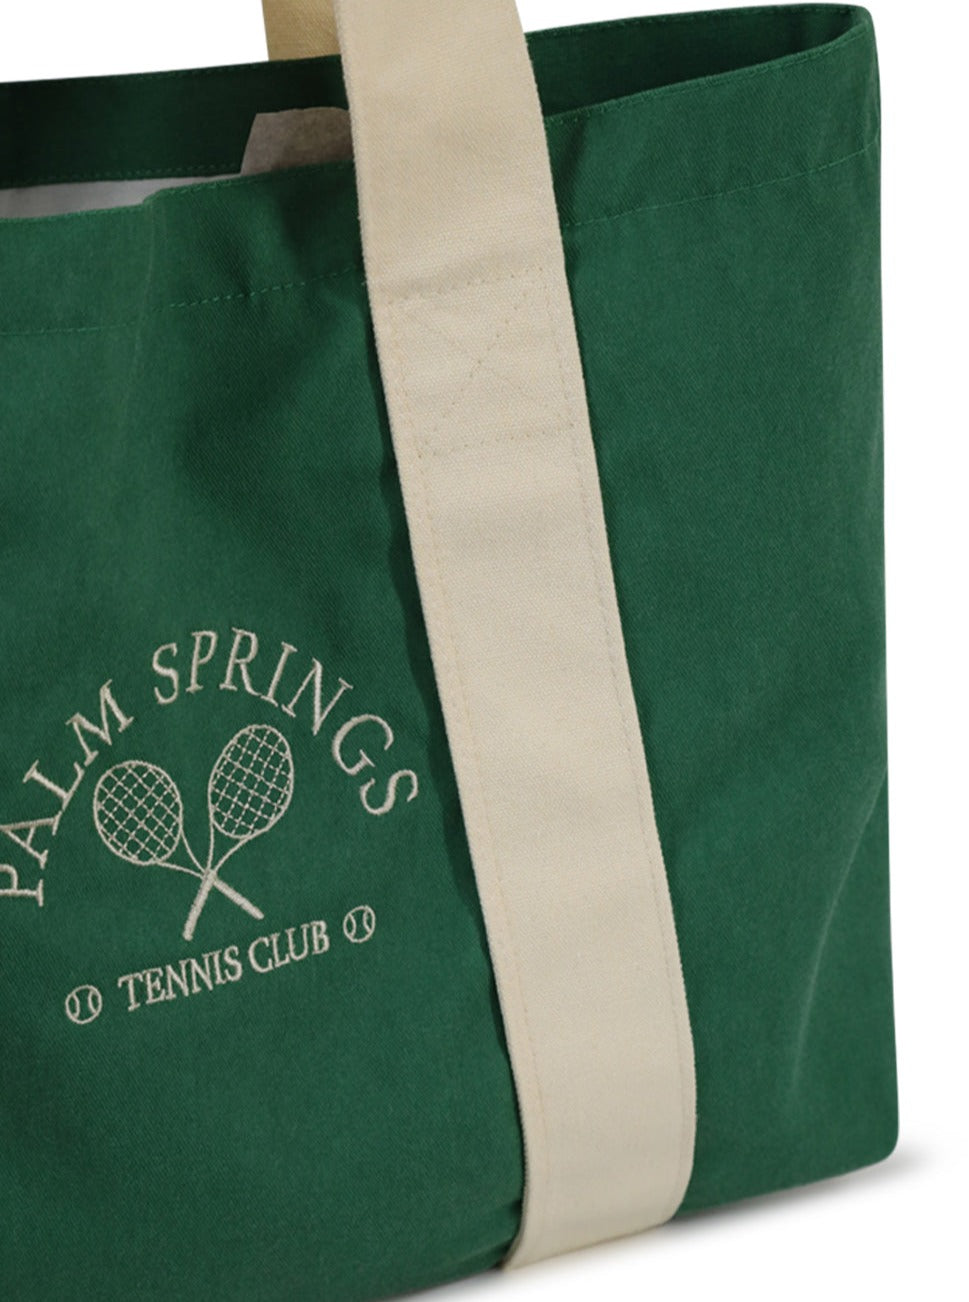 My Accessories London Palm Springs Oversized Tote Bag in Green and Off White | Retro | Tote | Bag | Shopper | Gym | Graphic | embroidered | Sporty | Athleisure | Sports | Washed | Women's | Women's Accessories